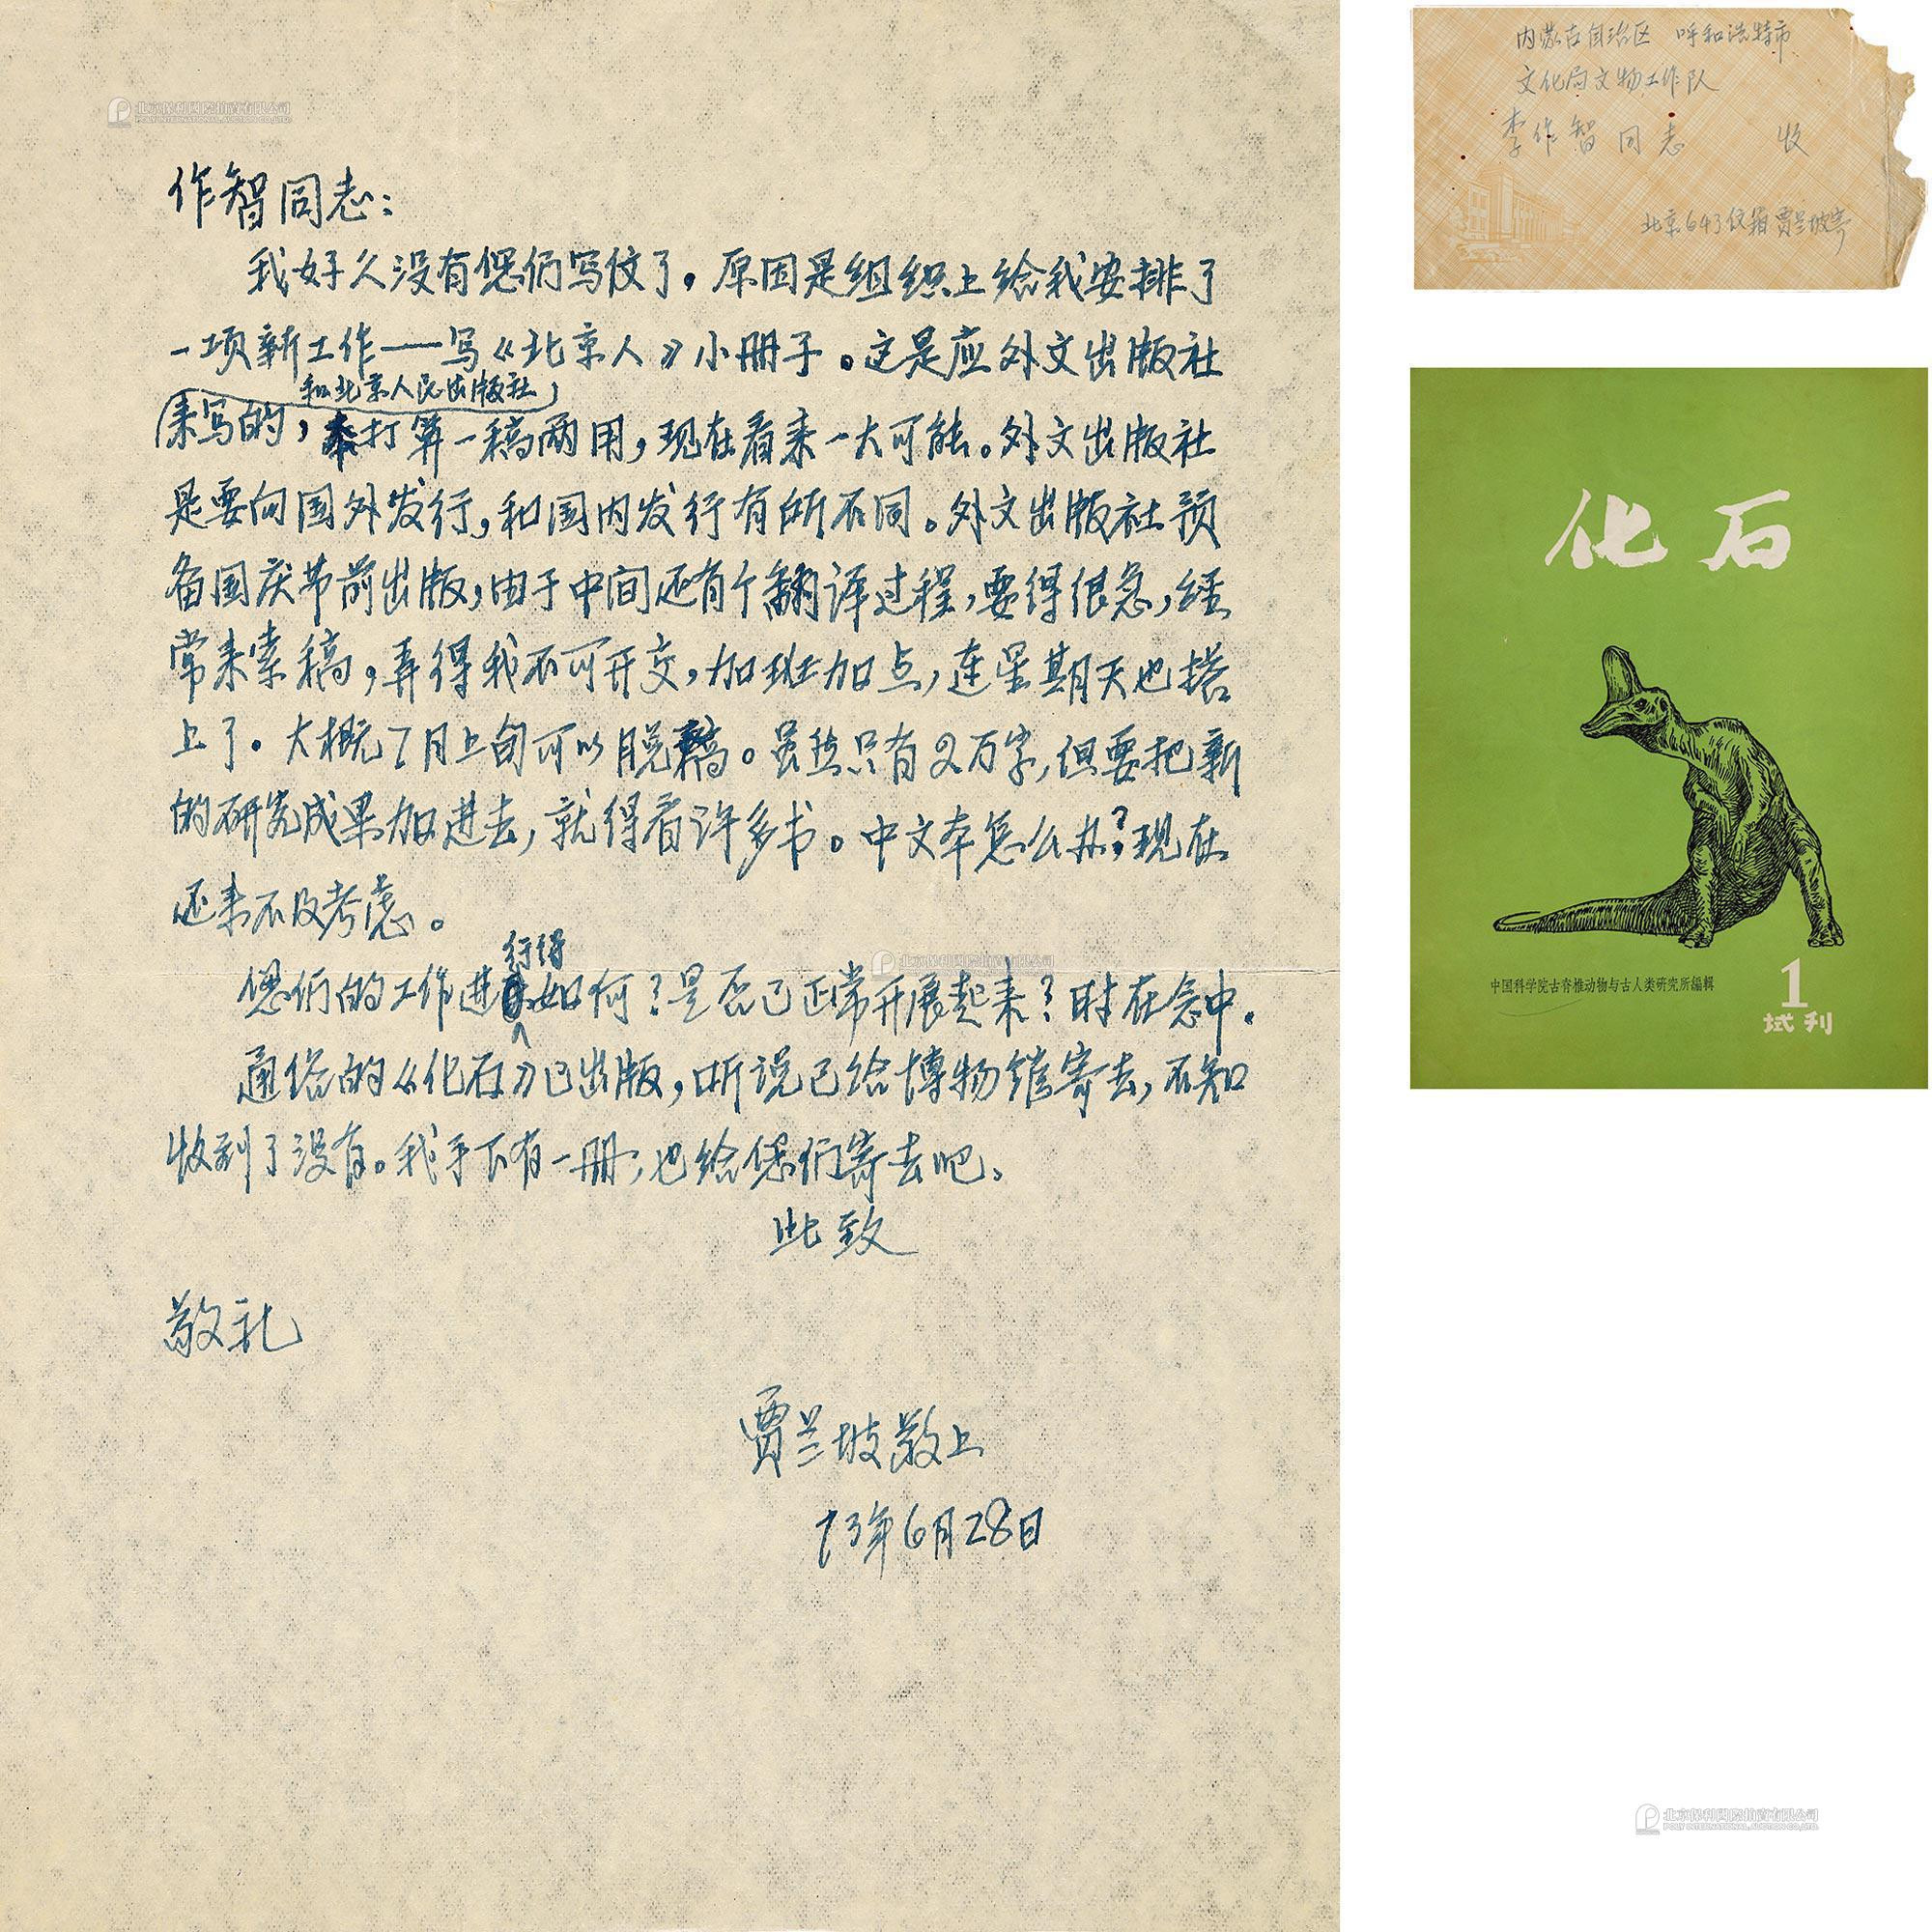 Letter of one page by Jia Lanpo， with original cover and One Volume of “Fossil” Magazine